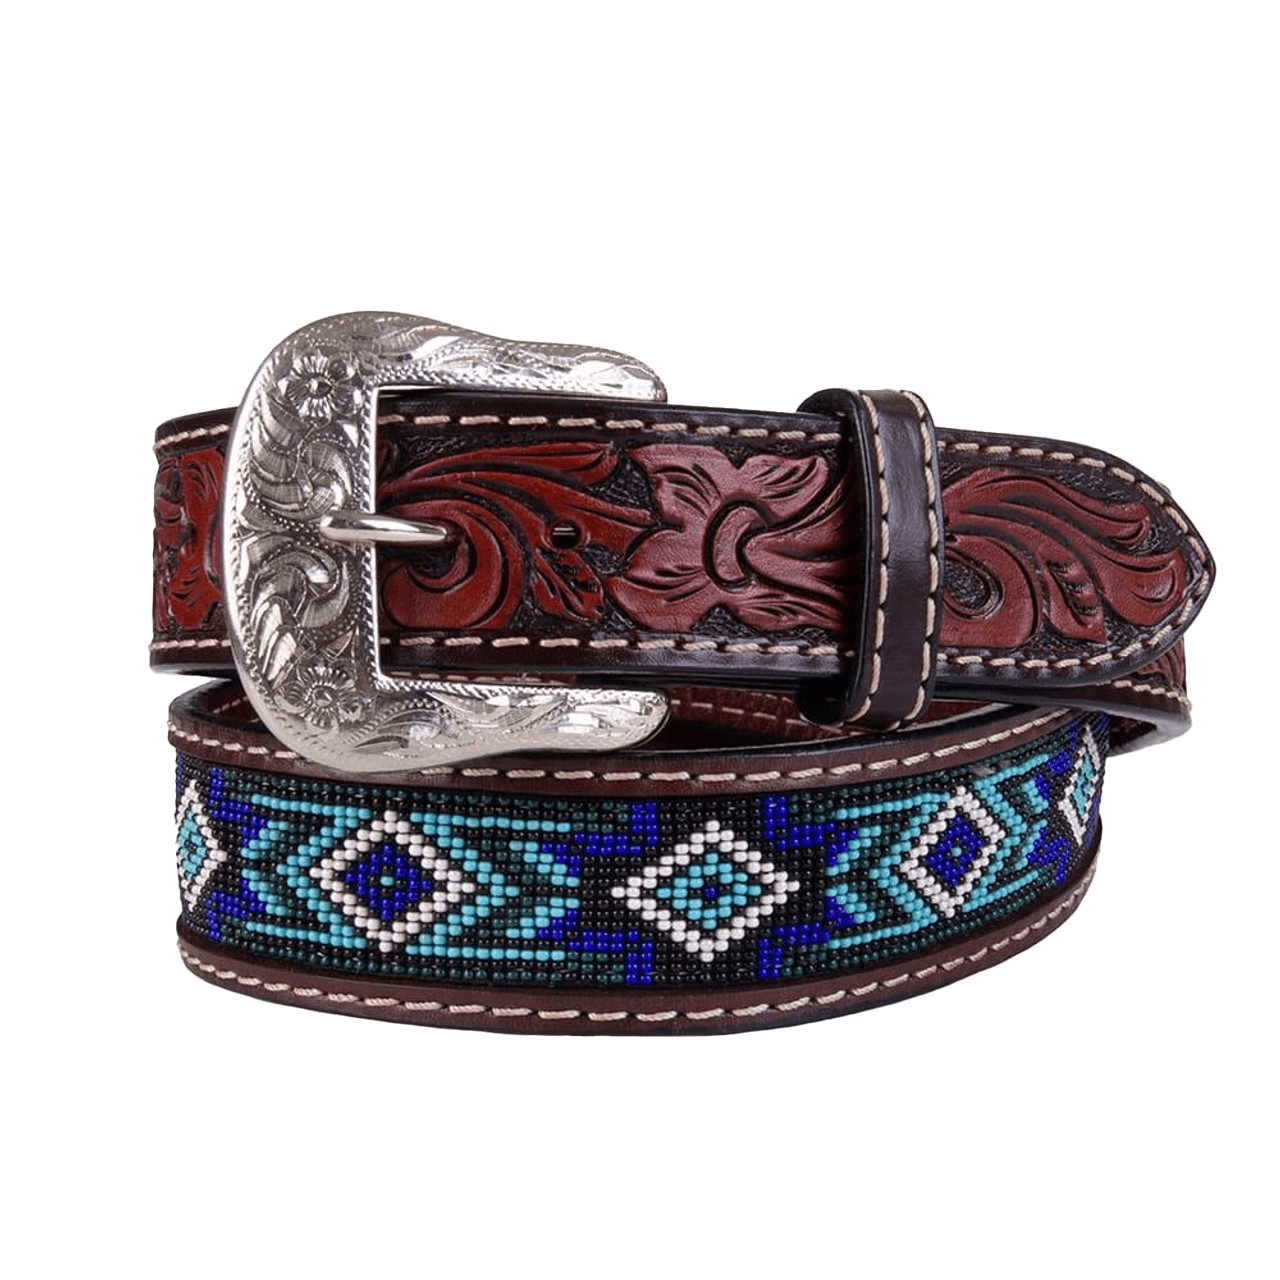 Western Fashion Brown With Blue And Turquoise Beading Belt